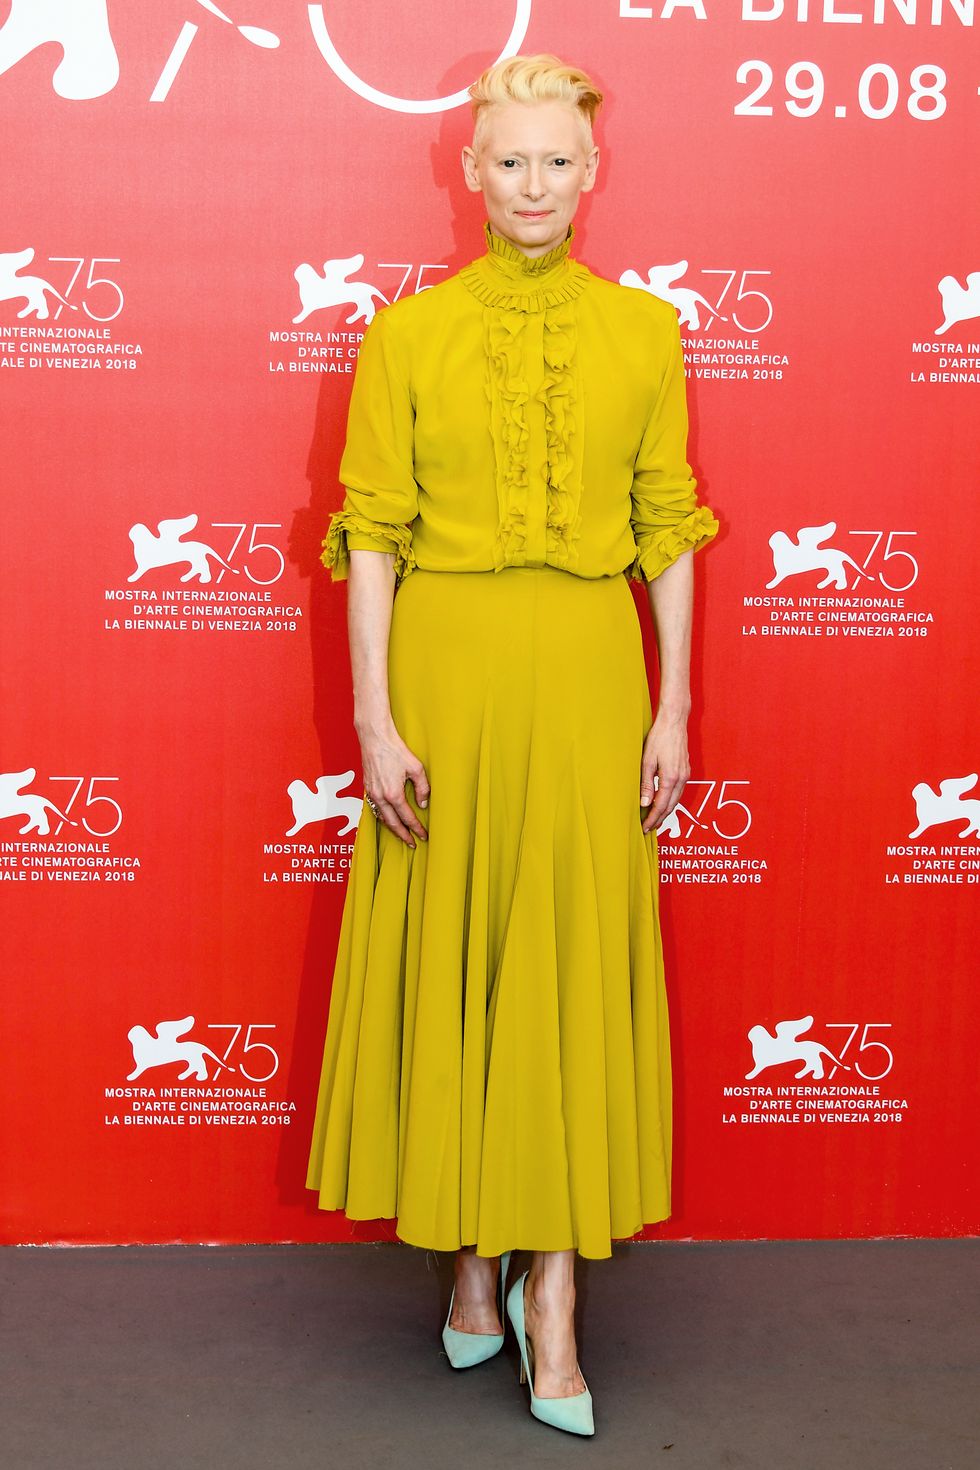 Yellow, Clothing, Red, Standing, Fashion, Flooring, Dress, Carpet, Premiere, Red carpet, 